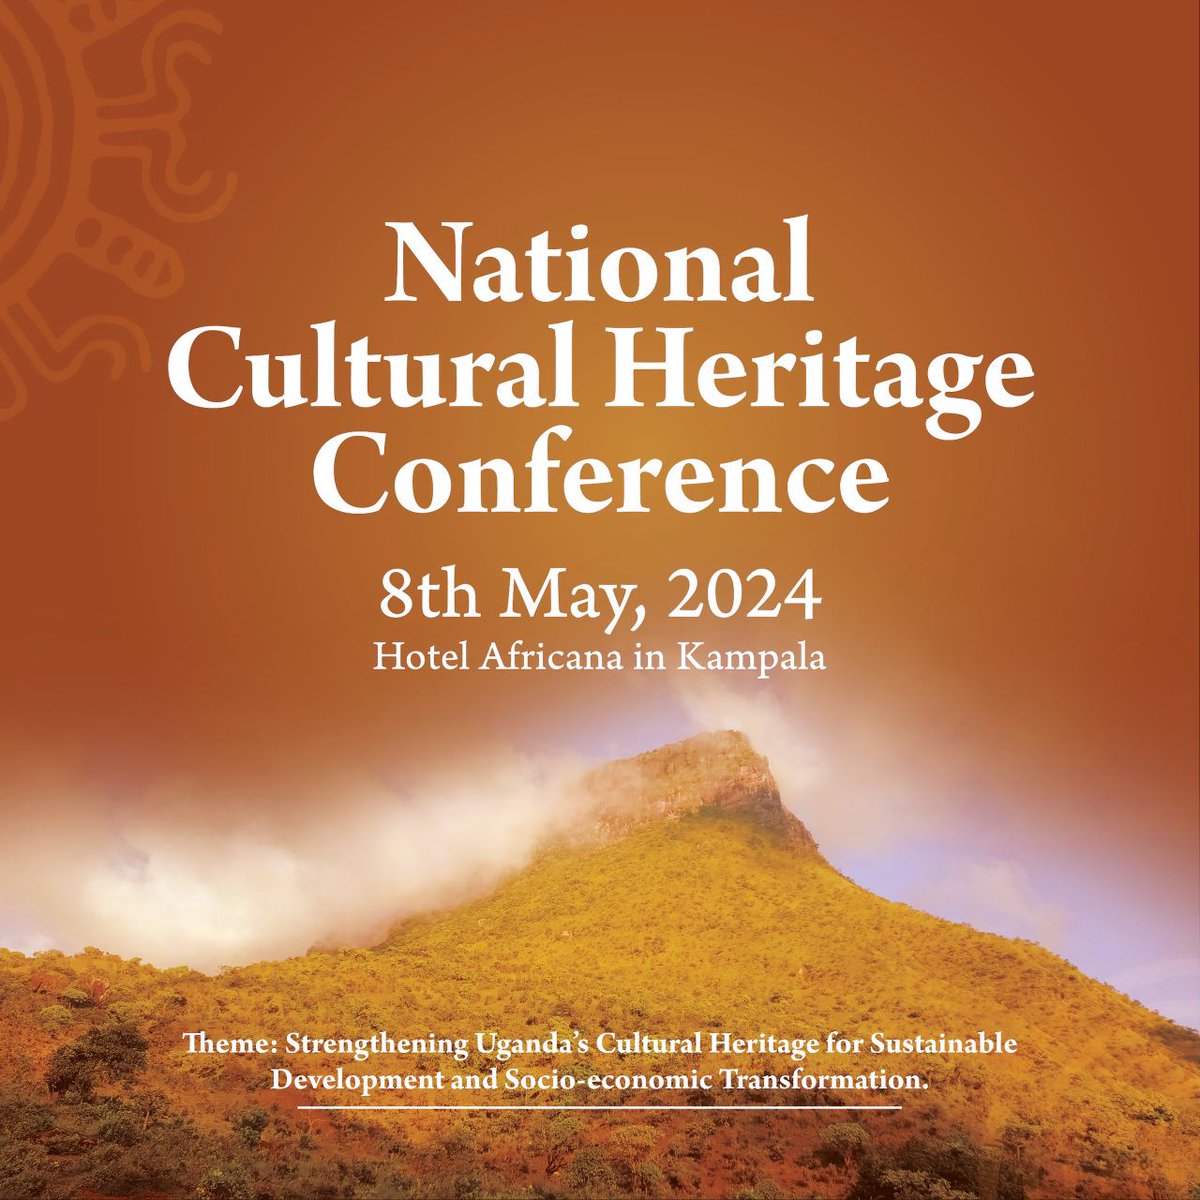 In progress @HotelAfricana,the National Cultural Heritage Conference organized by the Tourism Min.under @ugandamuseums Dept. Our Cultural Heritage is our pride & a celebration of the diverse languages,cultural norms,unique identity that unify us into a one people. @mugarra